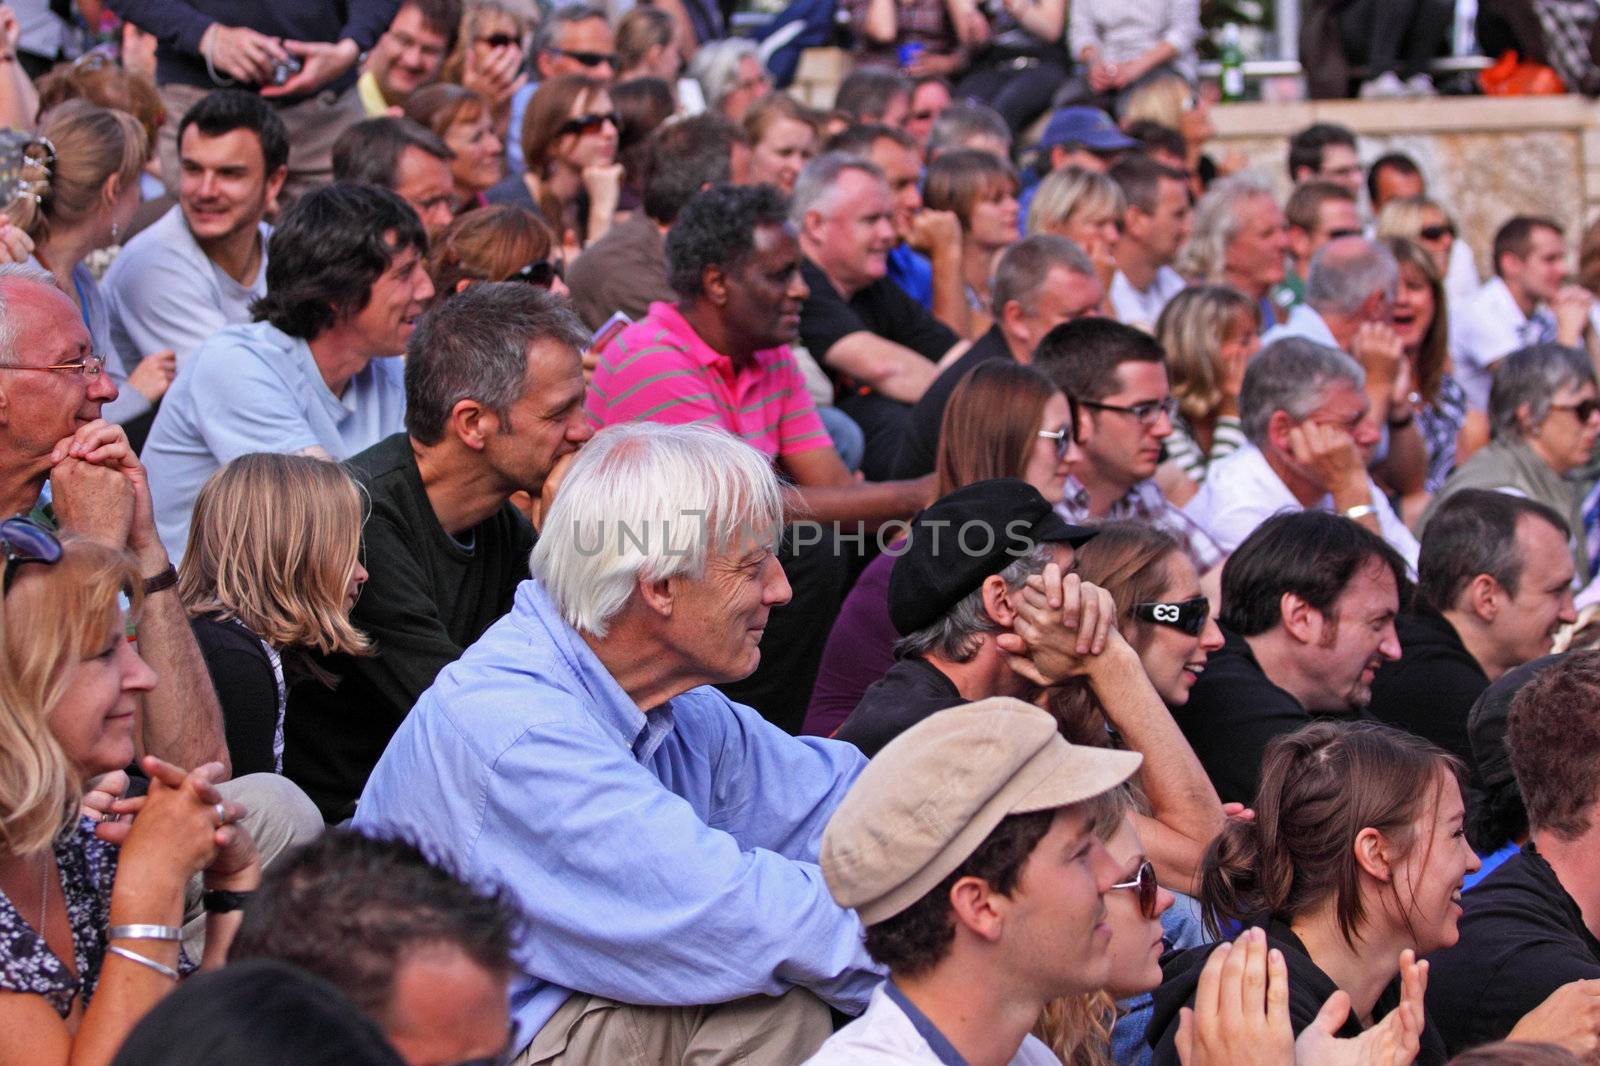 BRISTOL, ENGLAND - JULY 31: Audience watching musicians perform on the Cascade Steps stage at the Harbour Festival in Bristol, England on July 31, 2010